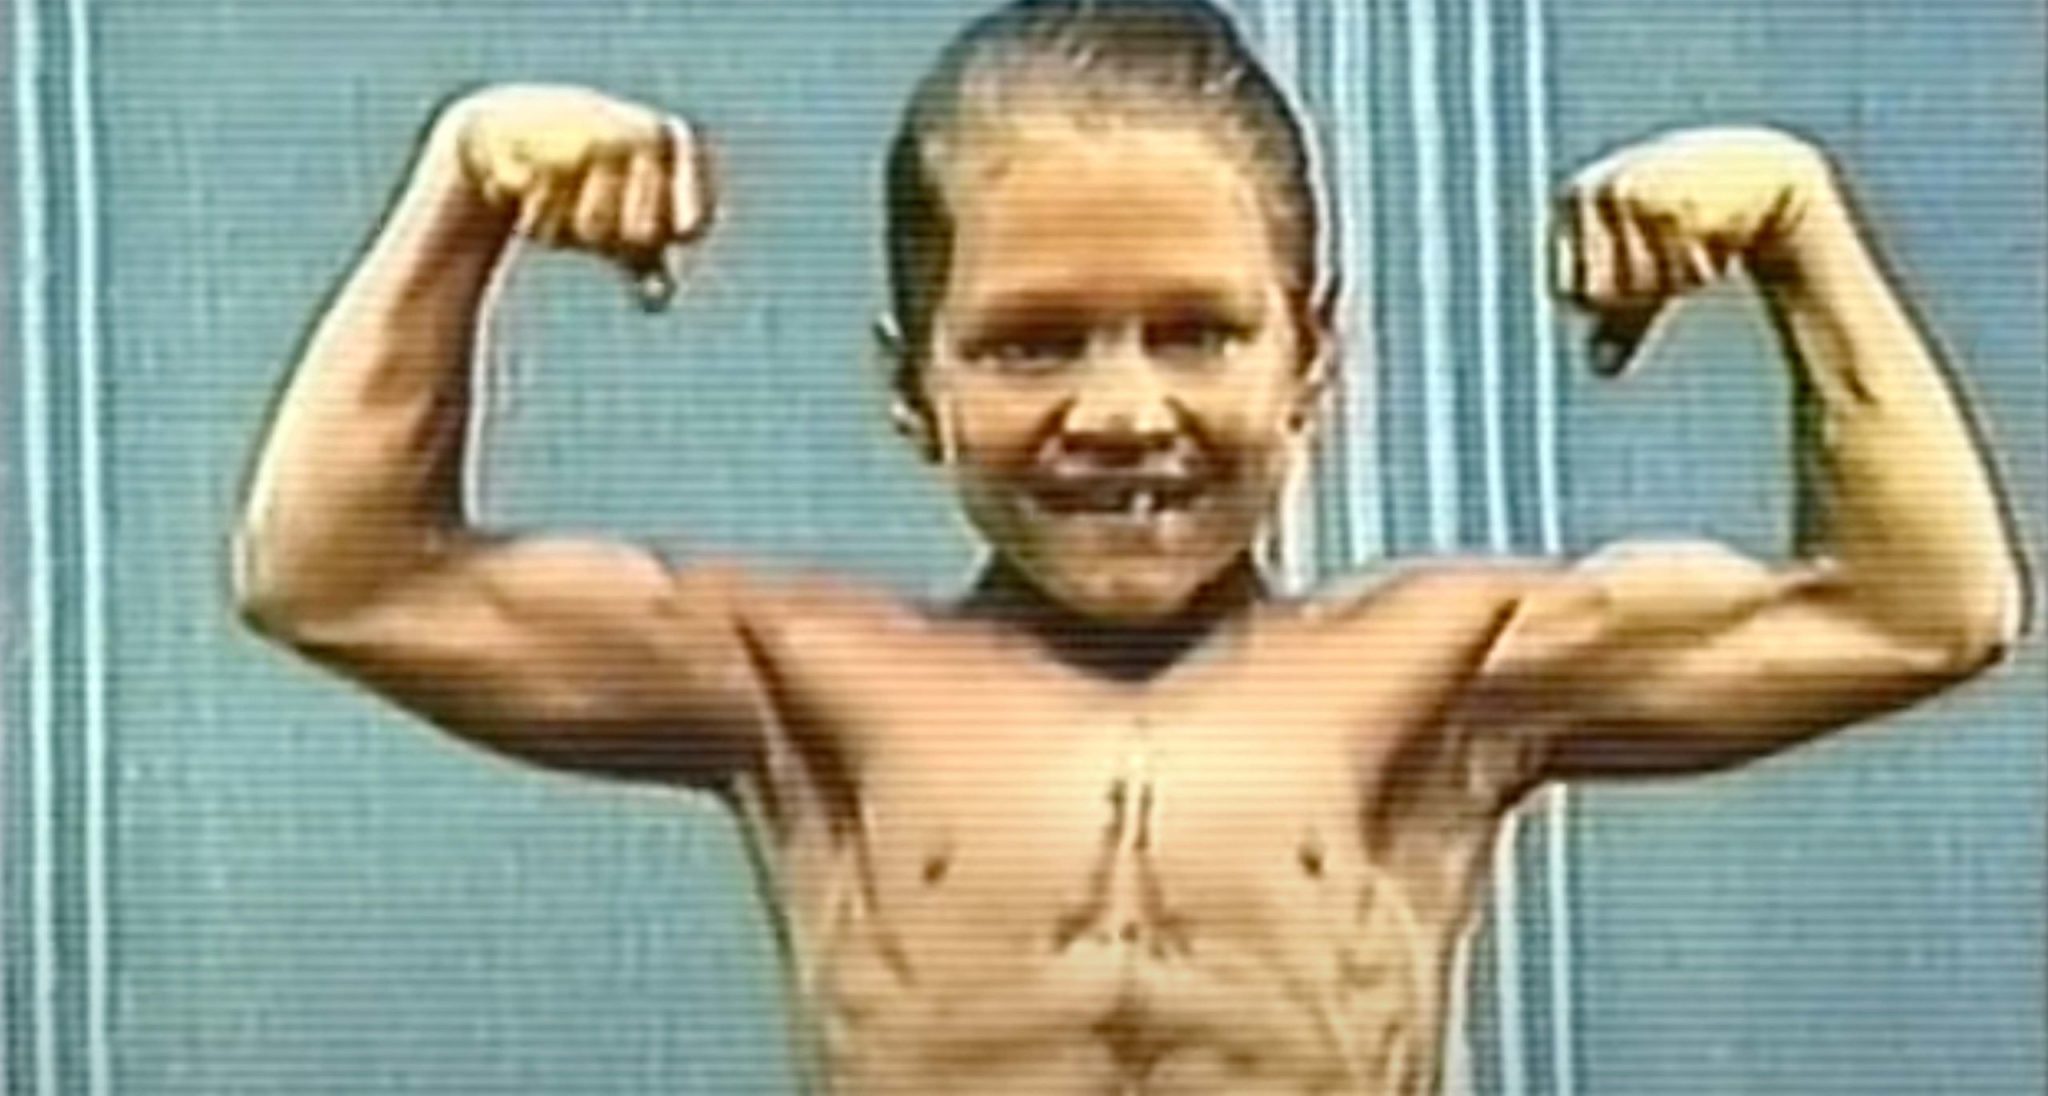 ‘Little Hercules’ was renowned as “The World’s Strongest Boy” before